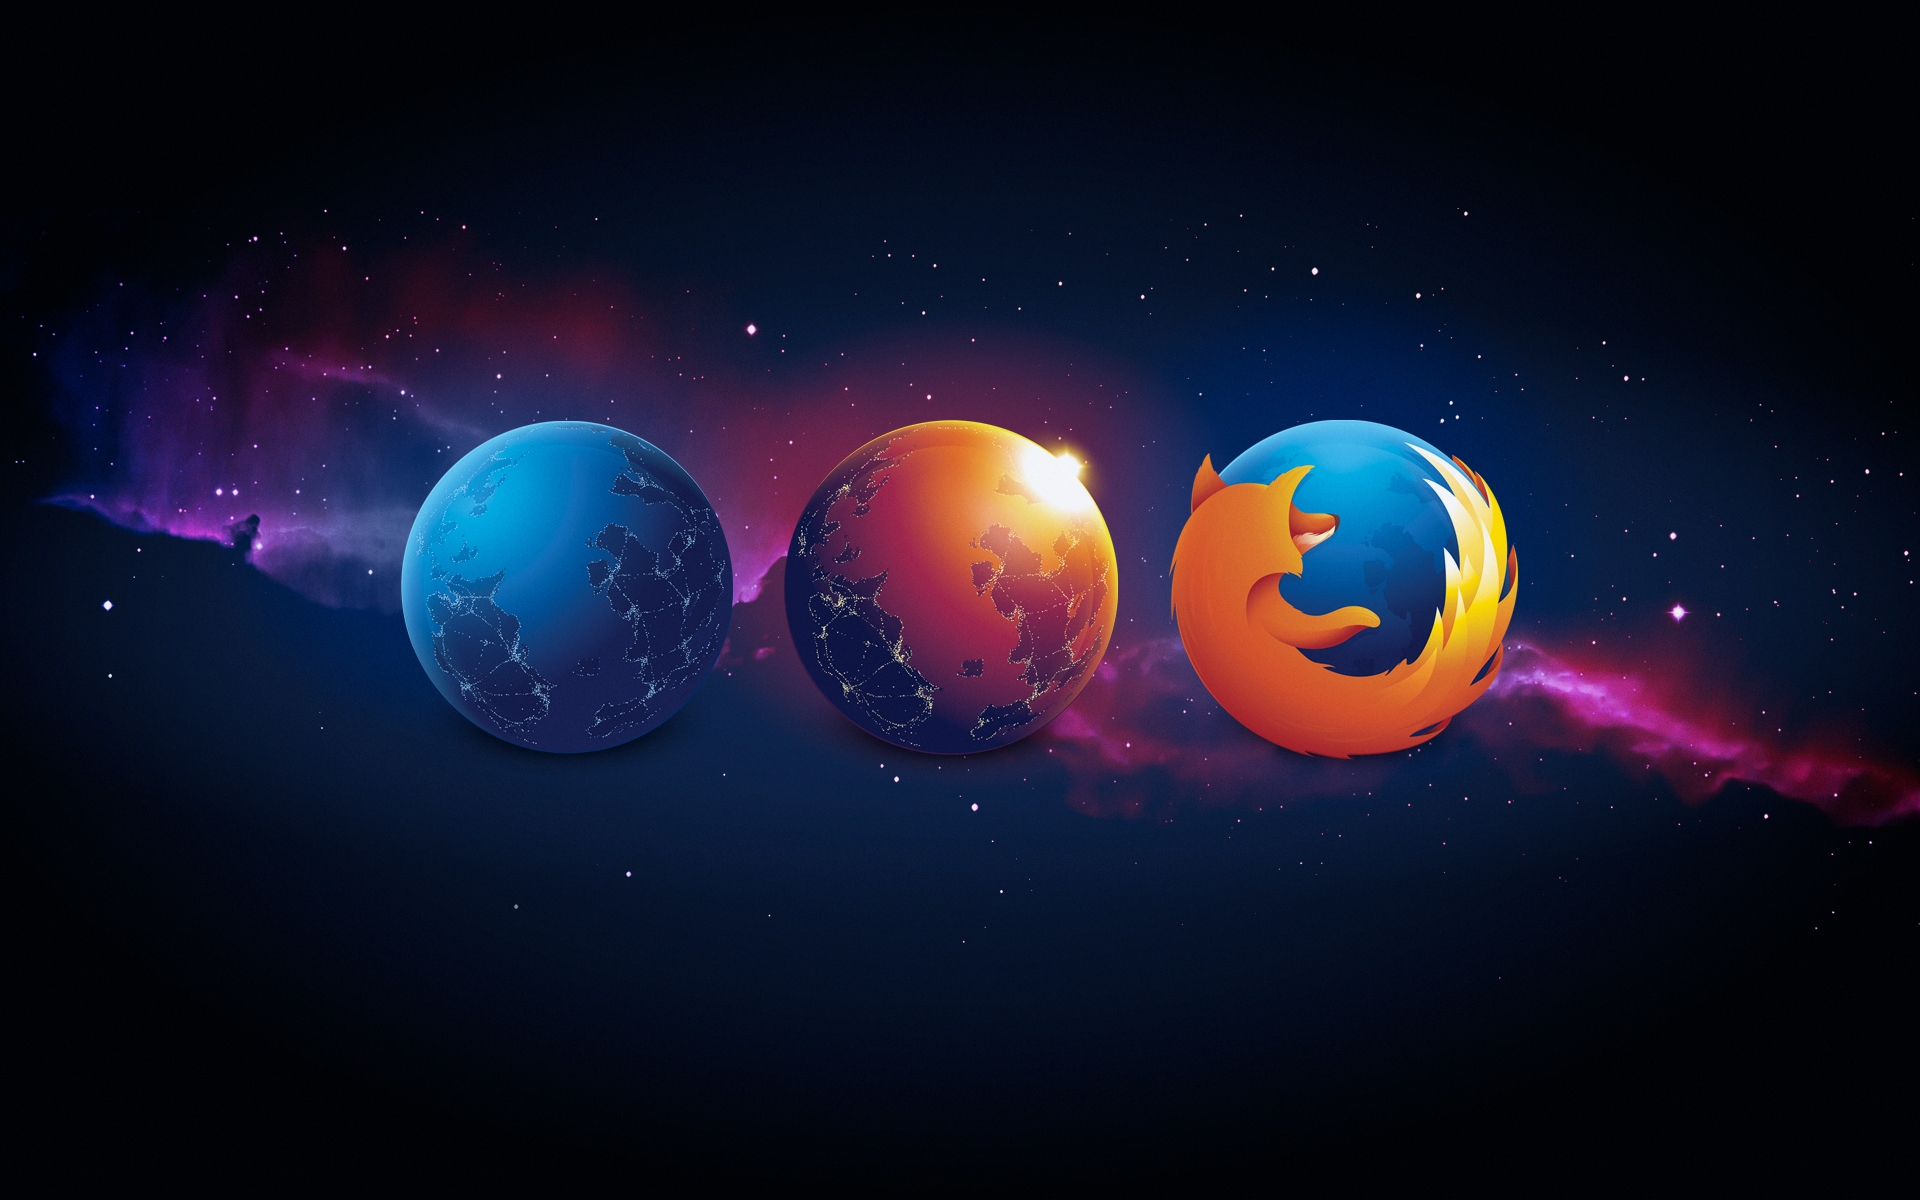 Browser Wallpapers